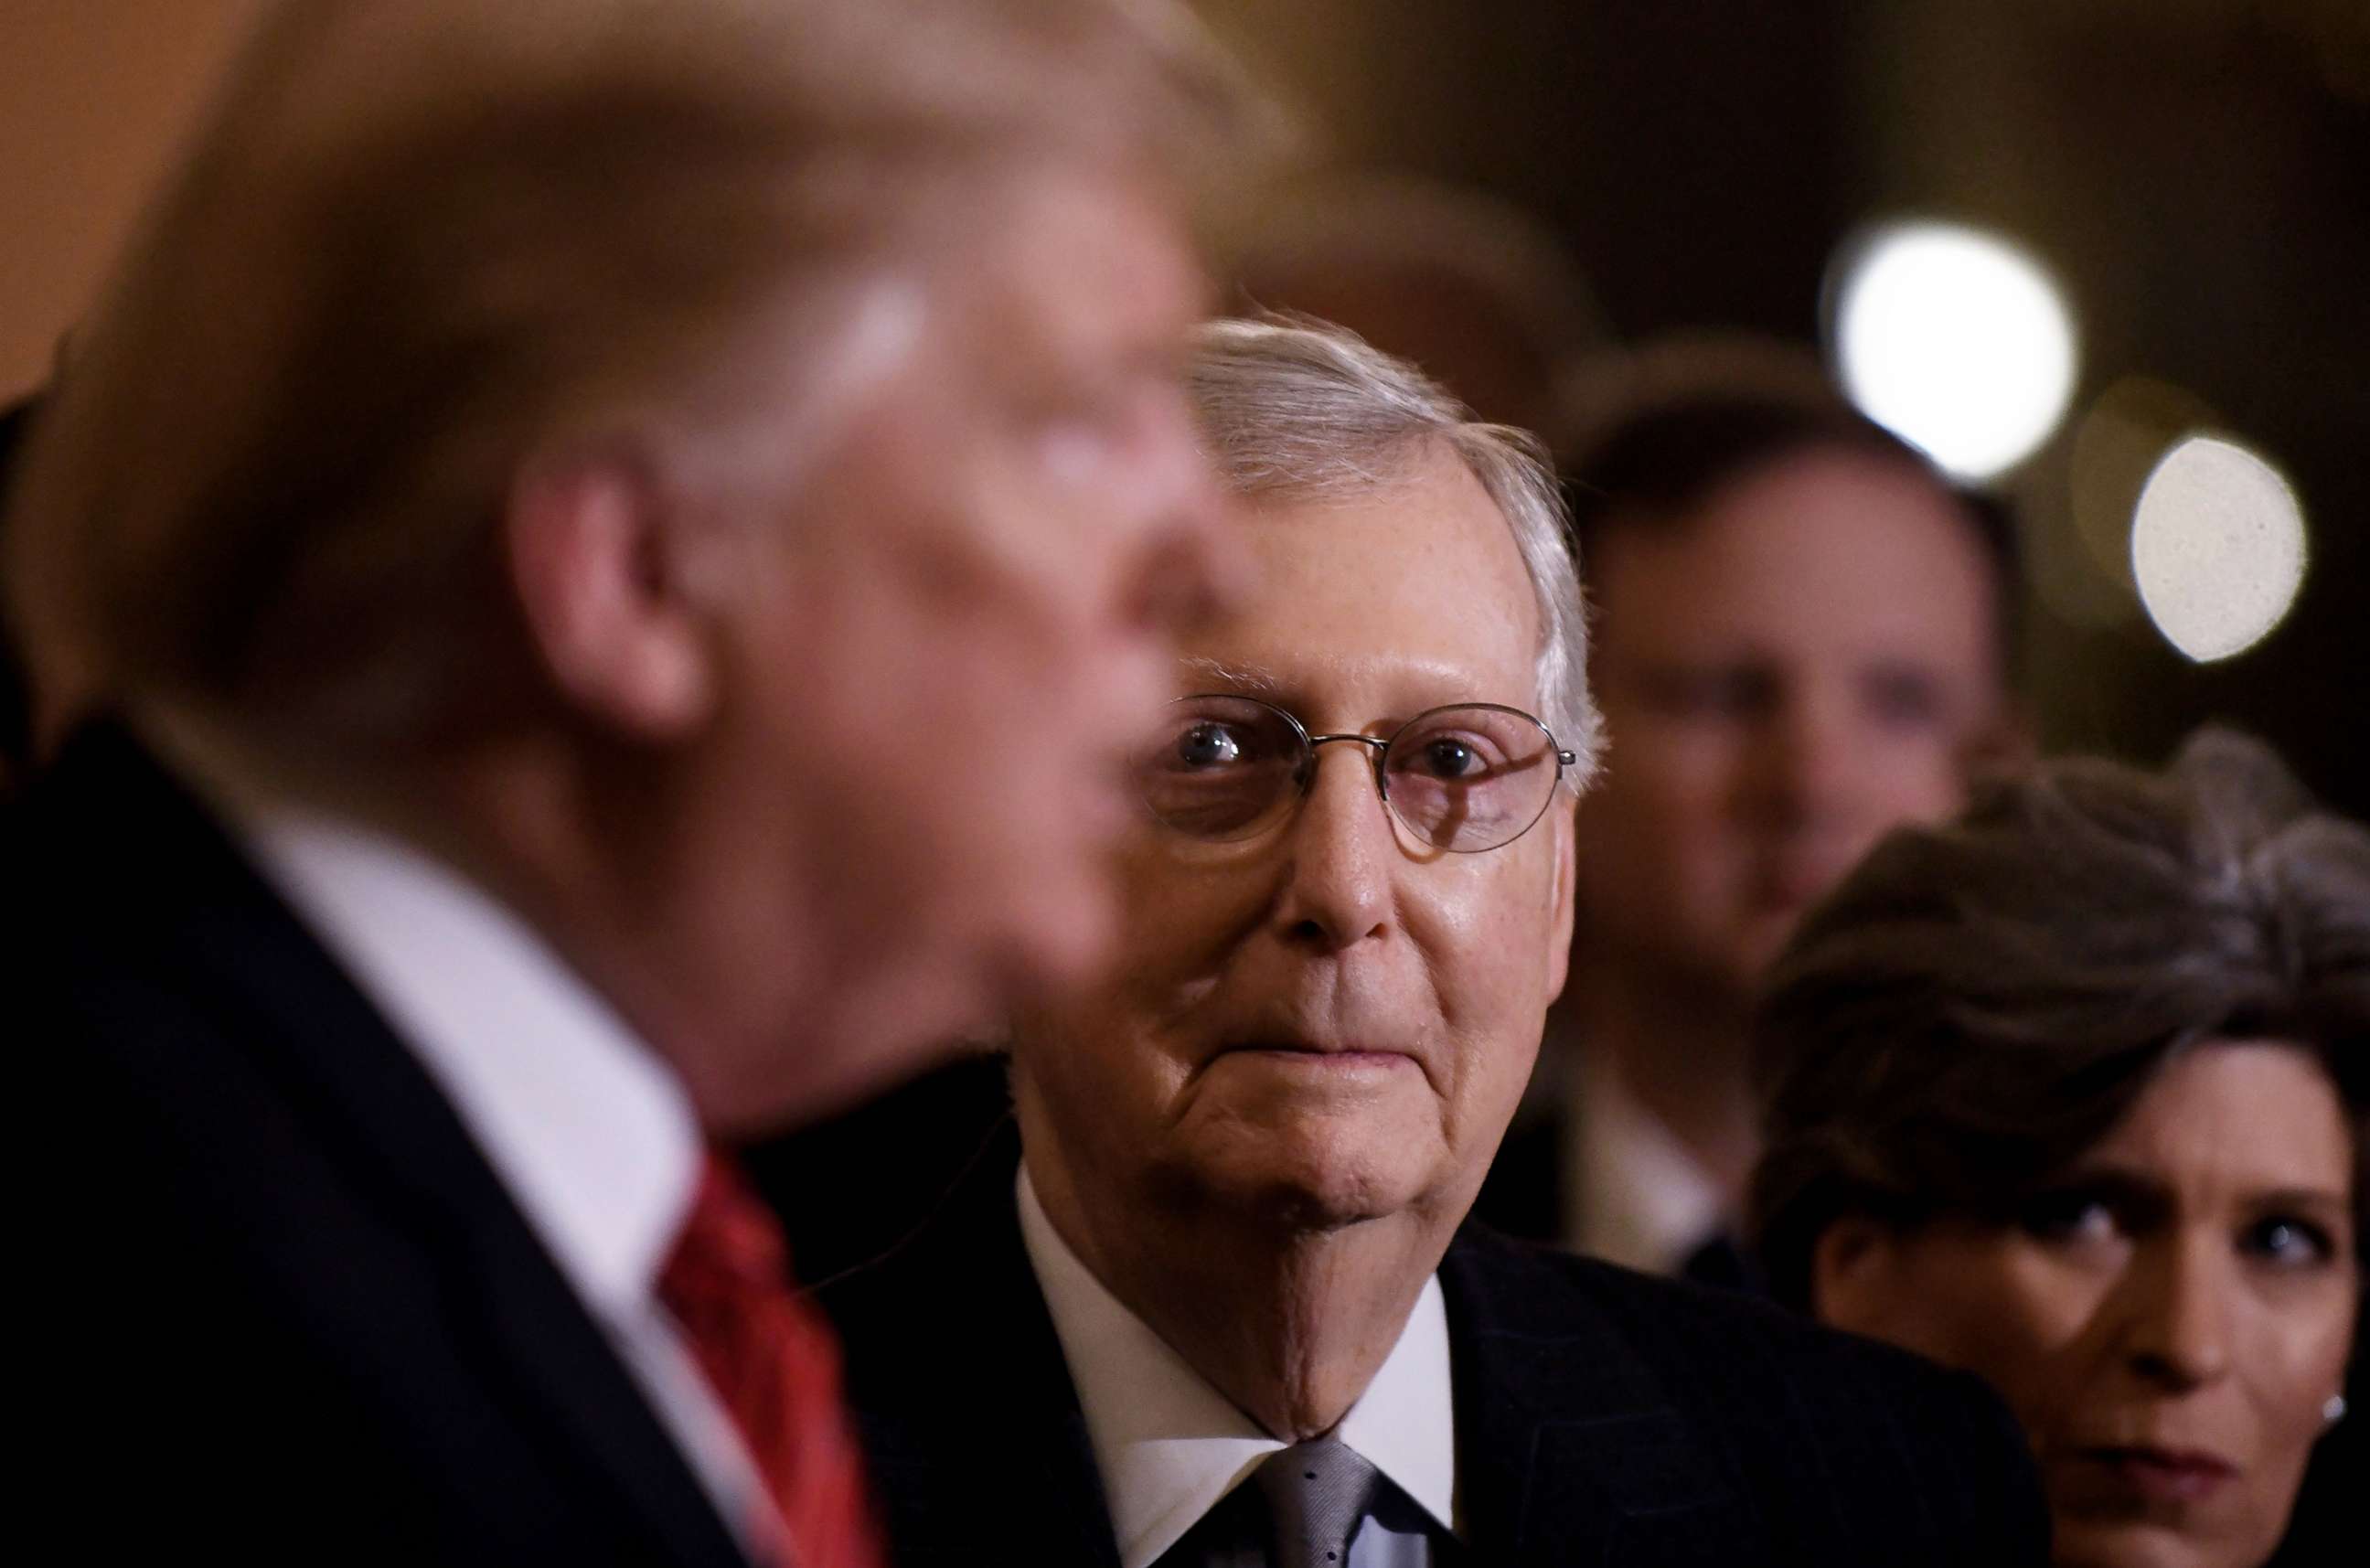 PHOTO: President Donald Trump talks to the press as Senate Majority Leader Mitch McConnell looks on after the Republican luncheon at the Capitol Hill in Washington, Jan. 9, 2019.